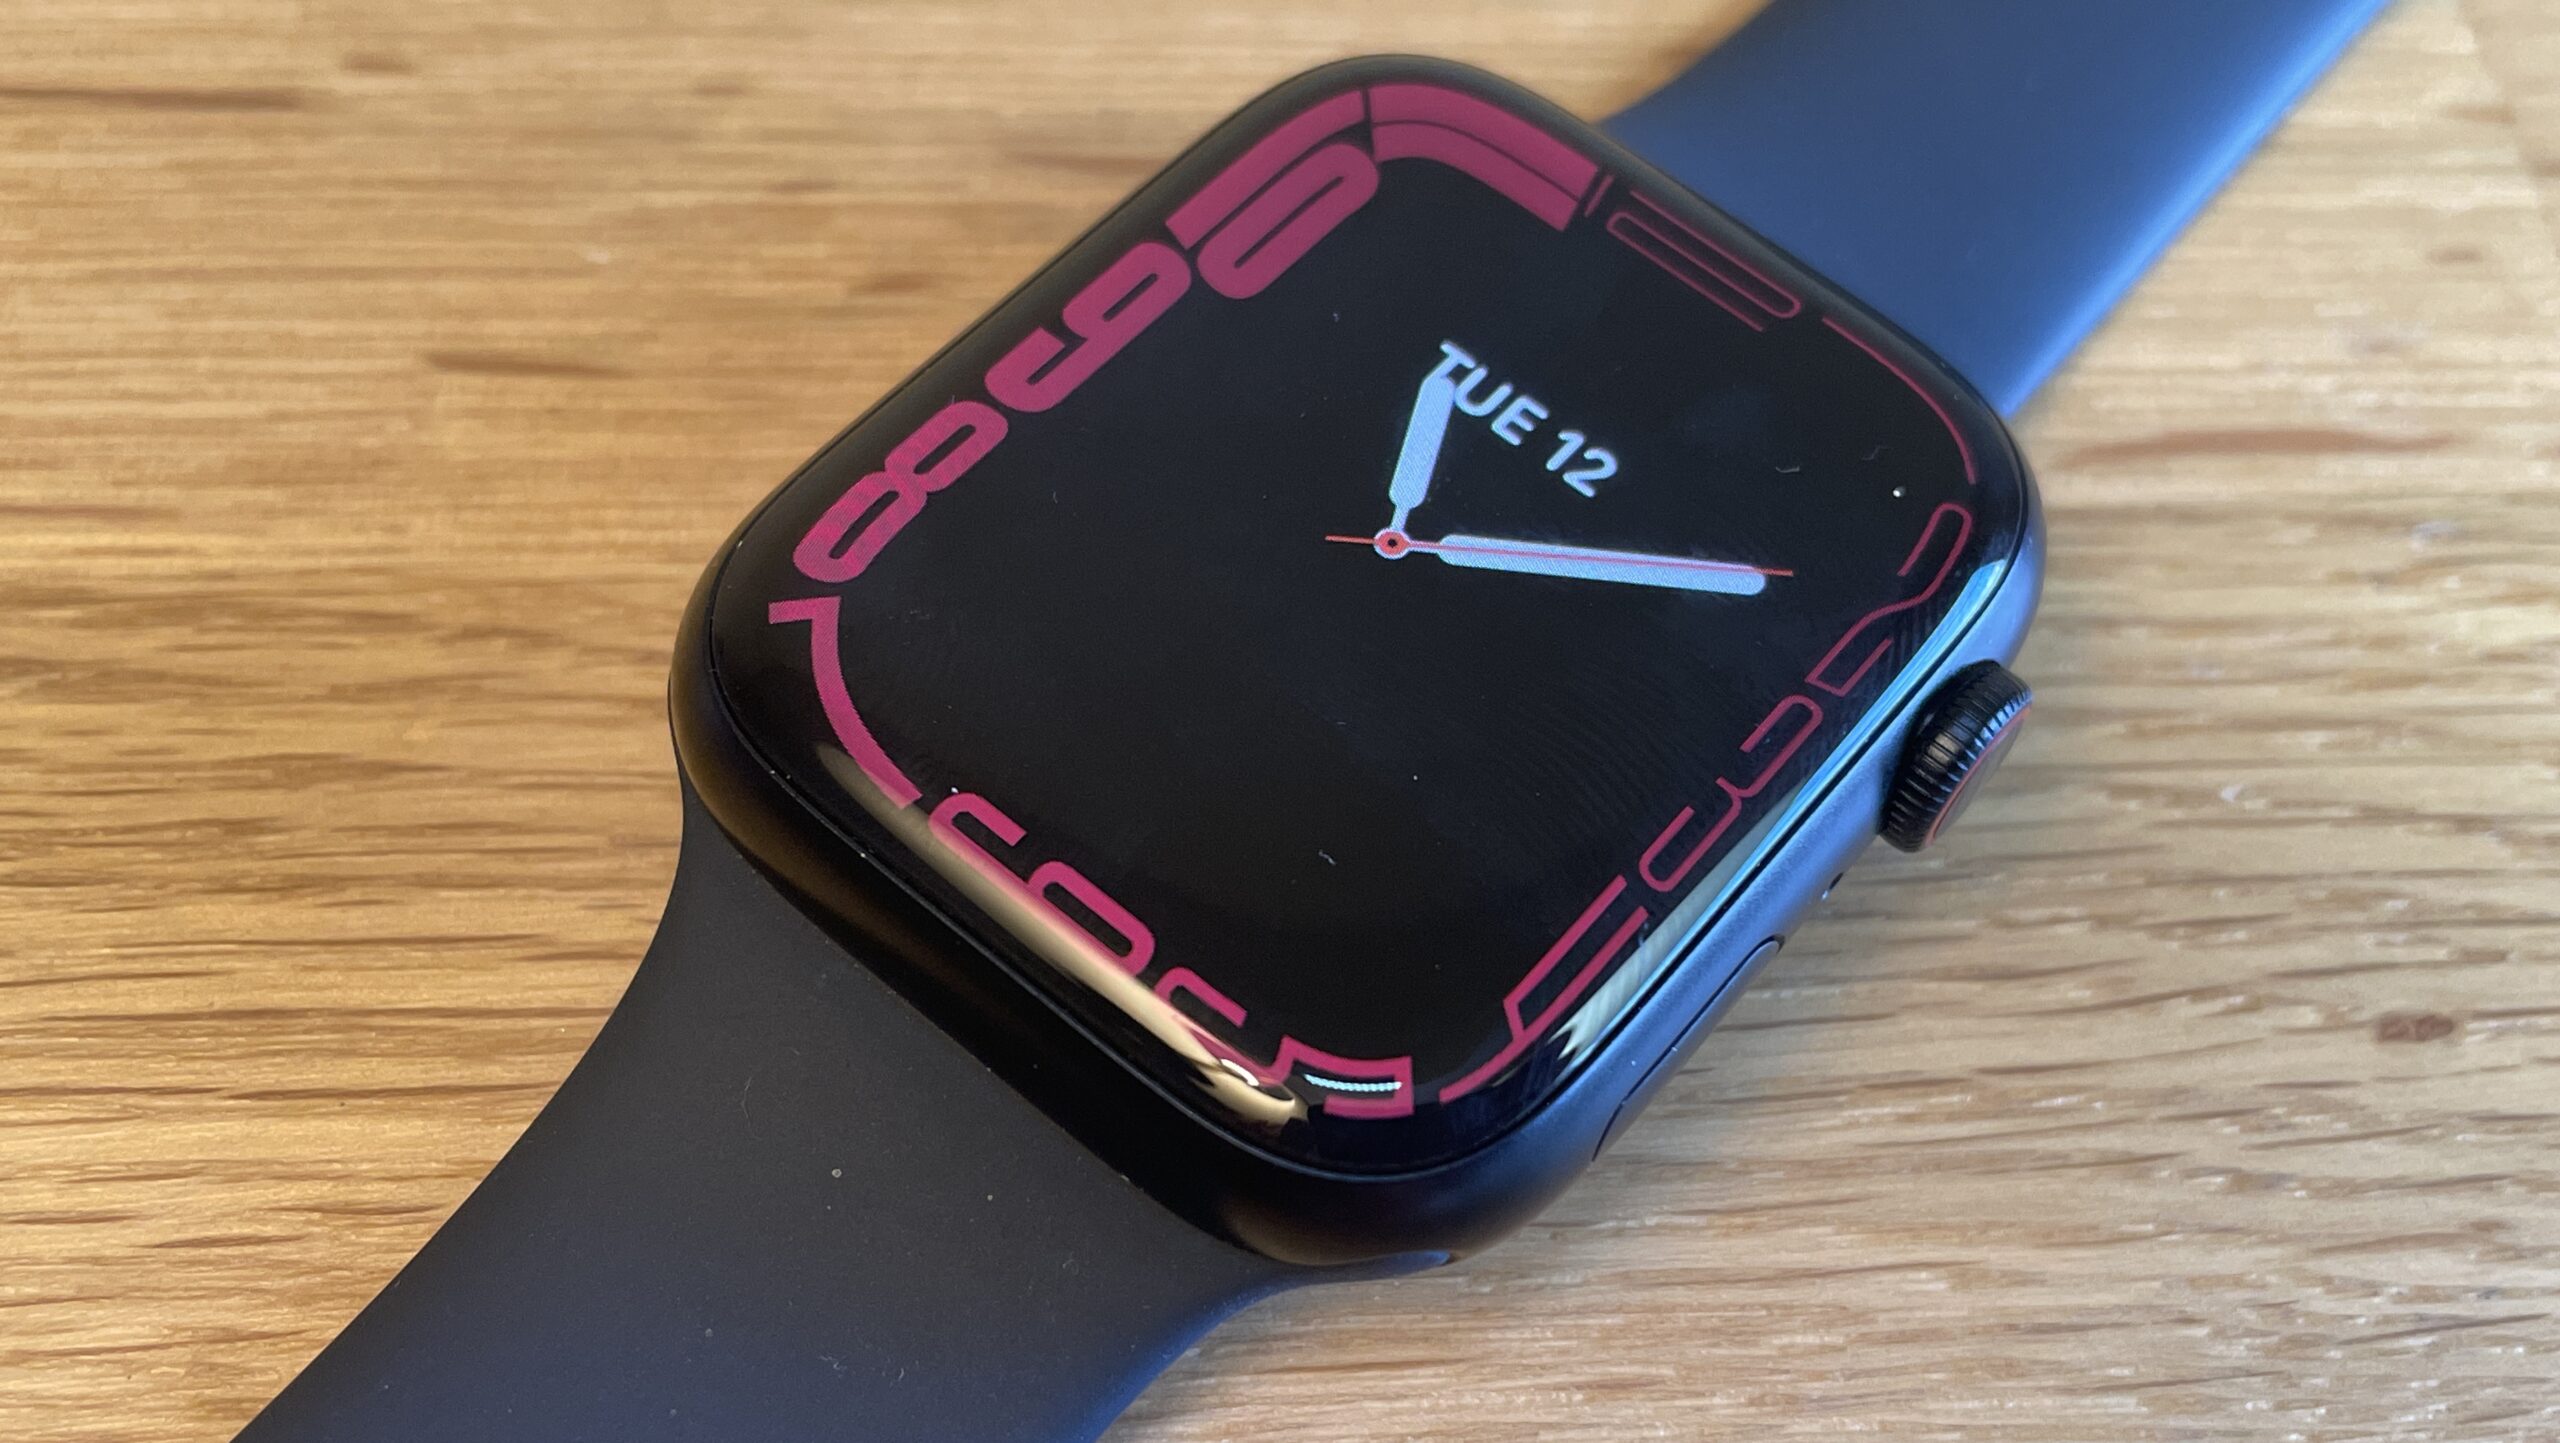 Apple Watch Series 7 vs SE: Which one should you buy? - Reviewed